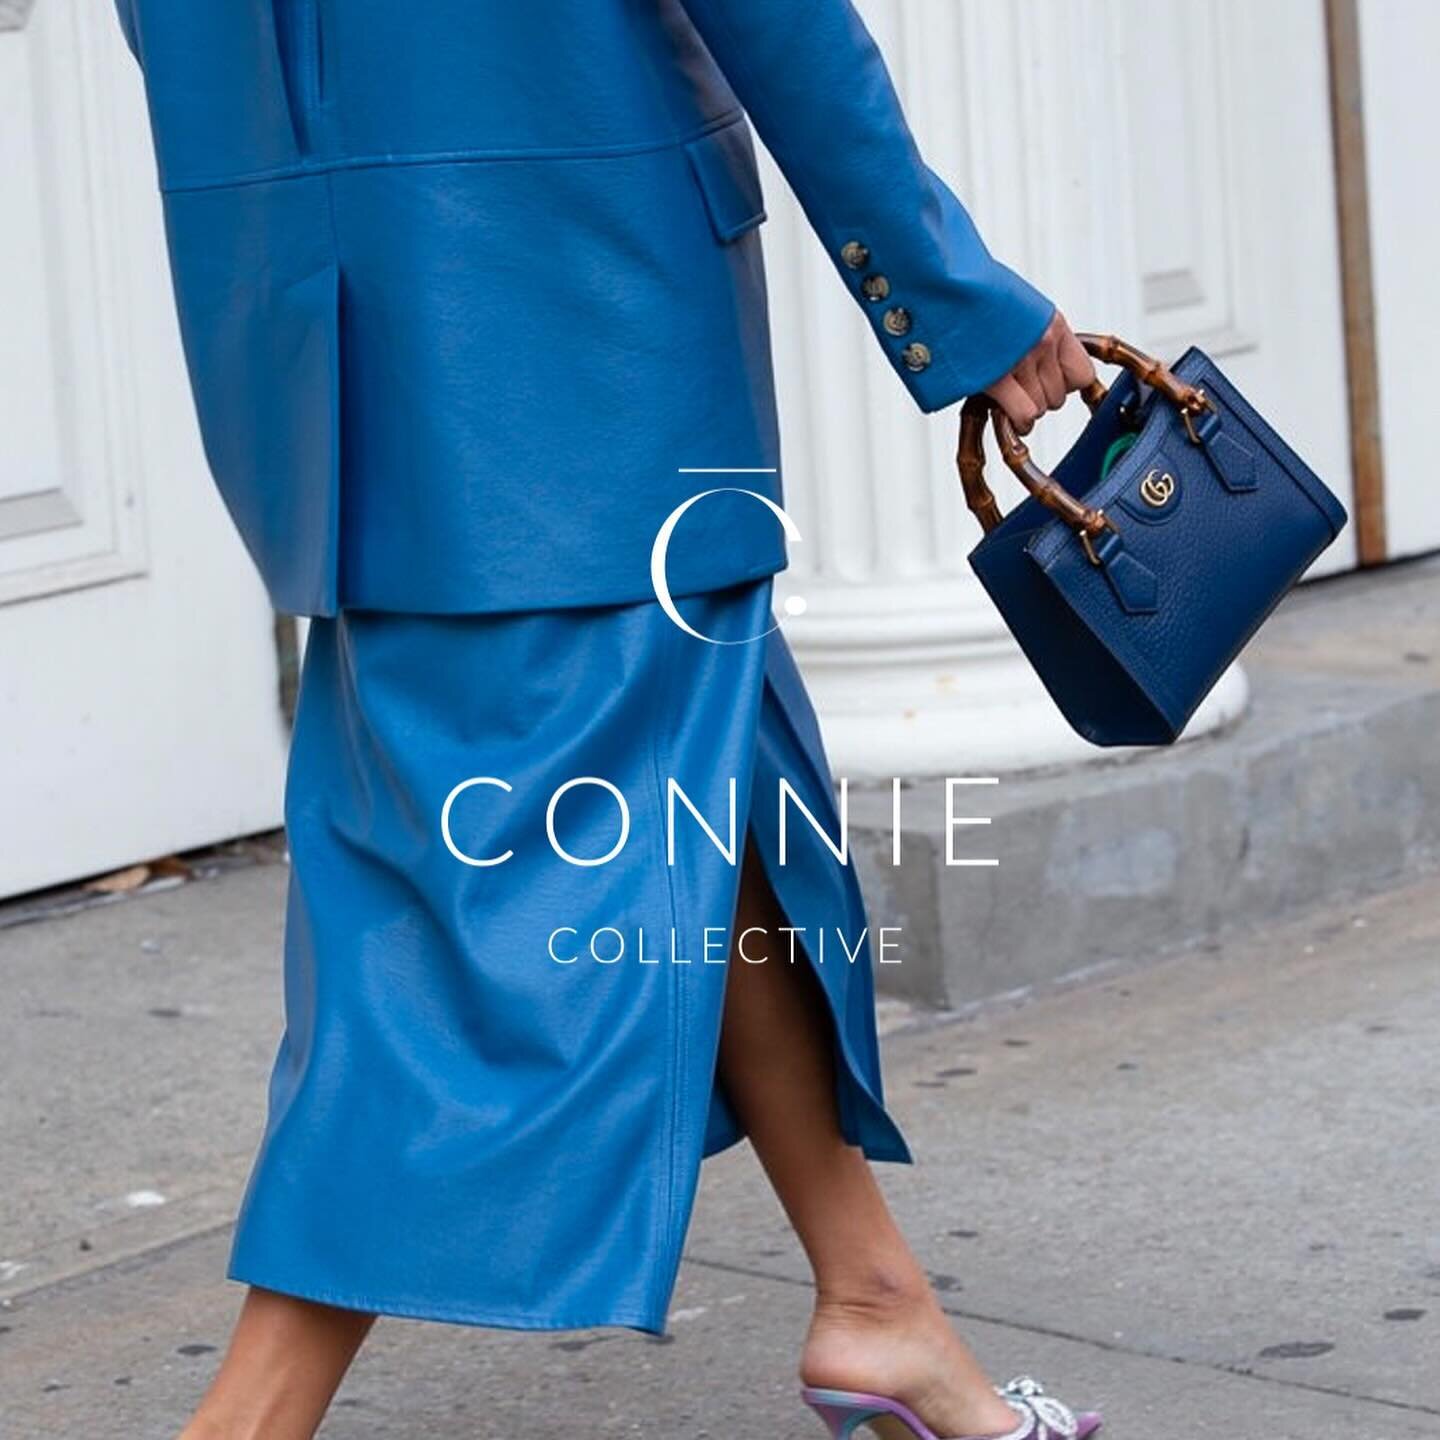 Discover the new @connie_personal_shopping (UK) branding! 

Constance Jones is a global force in the fashion space. Specialising in sourcing luxury goods for a broad range of clientele, from celebrity status to lovers of fashion.

From wishlist worth